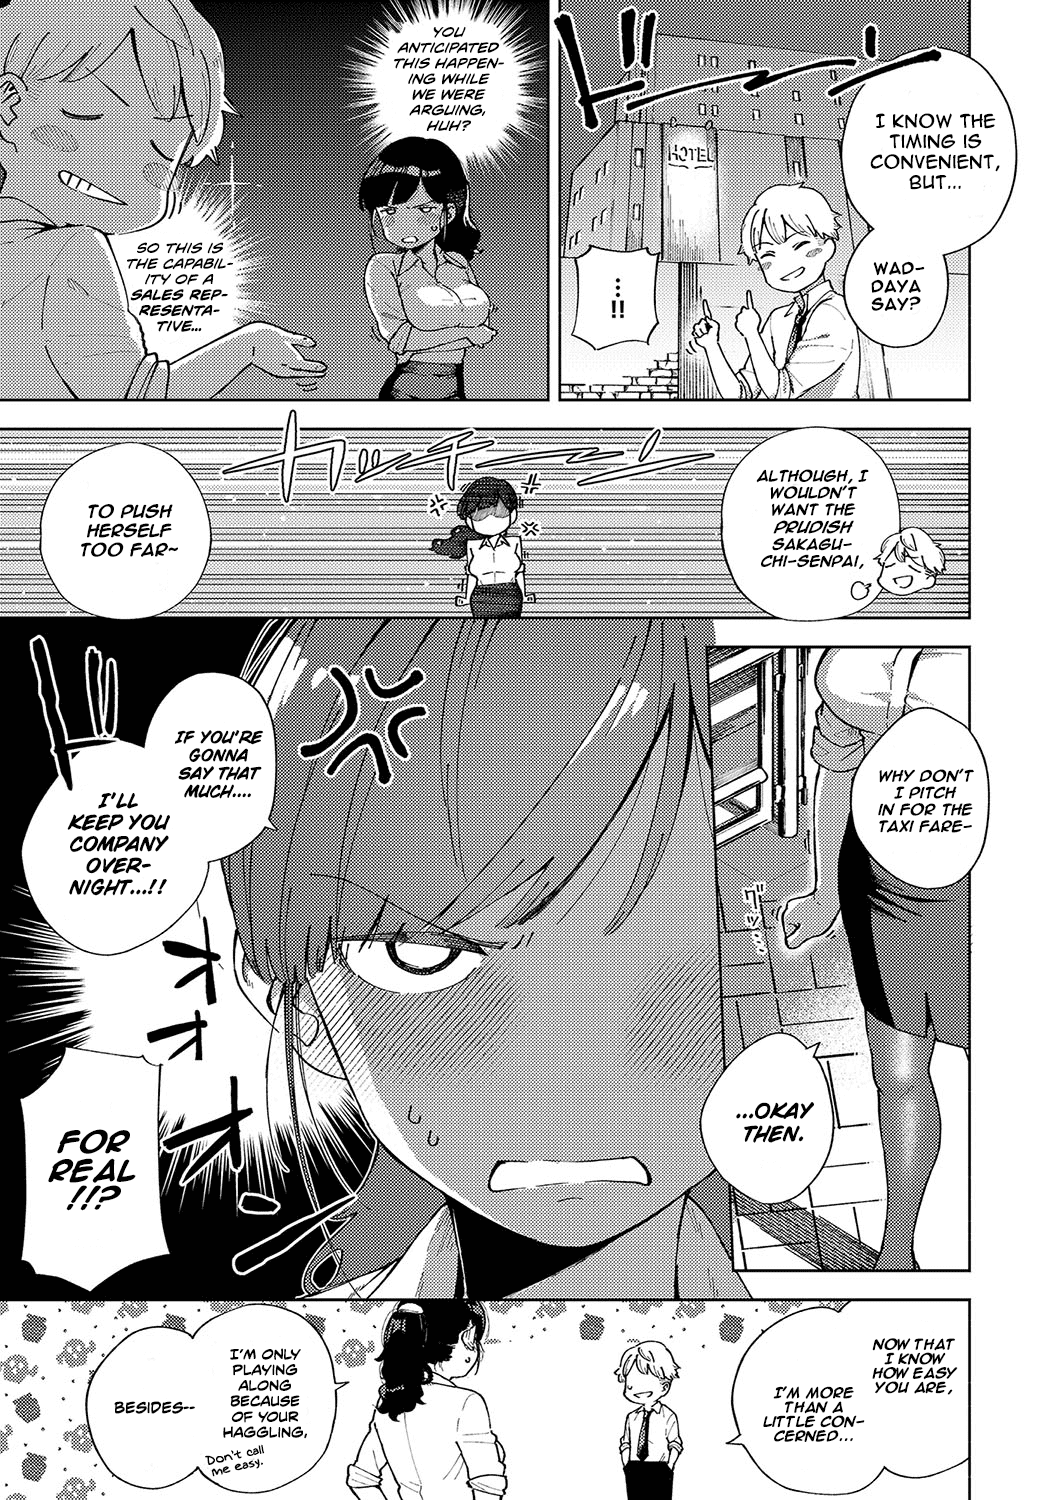 [Herio] Okatai Onna to Iwanaide | Don't call me an Old Maid! (COMIC ExE 15) [English] [Scansforhumanity] [Digital] [ヘリを] お堅い女と言わないで (コミック エグゼ 15) [英訳] [DL版]